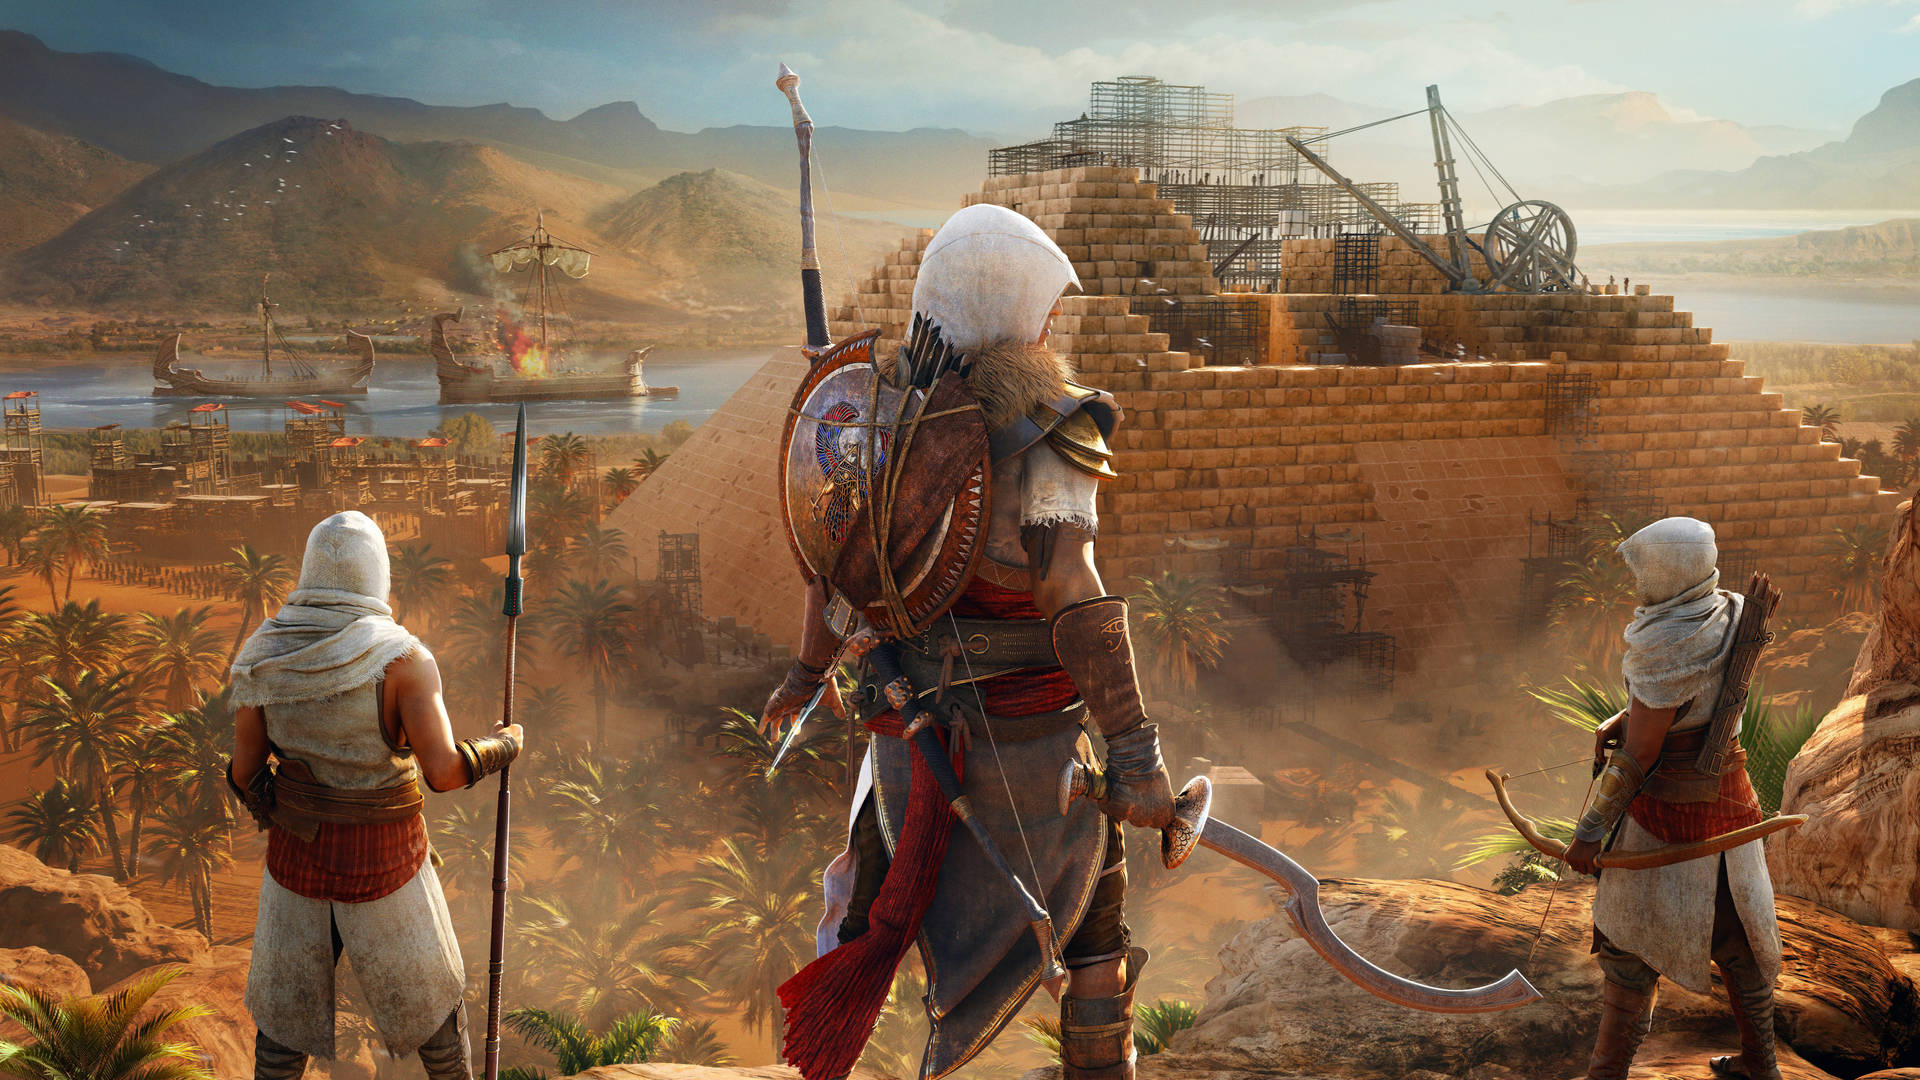 Caption: A Moment In Time – Assassin’s Creed Origins Background